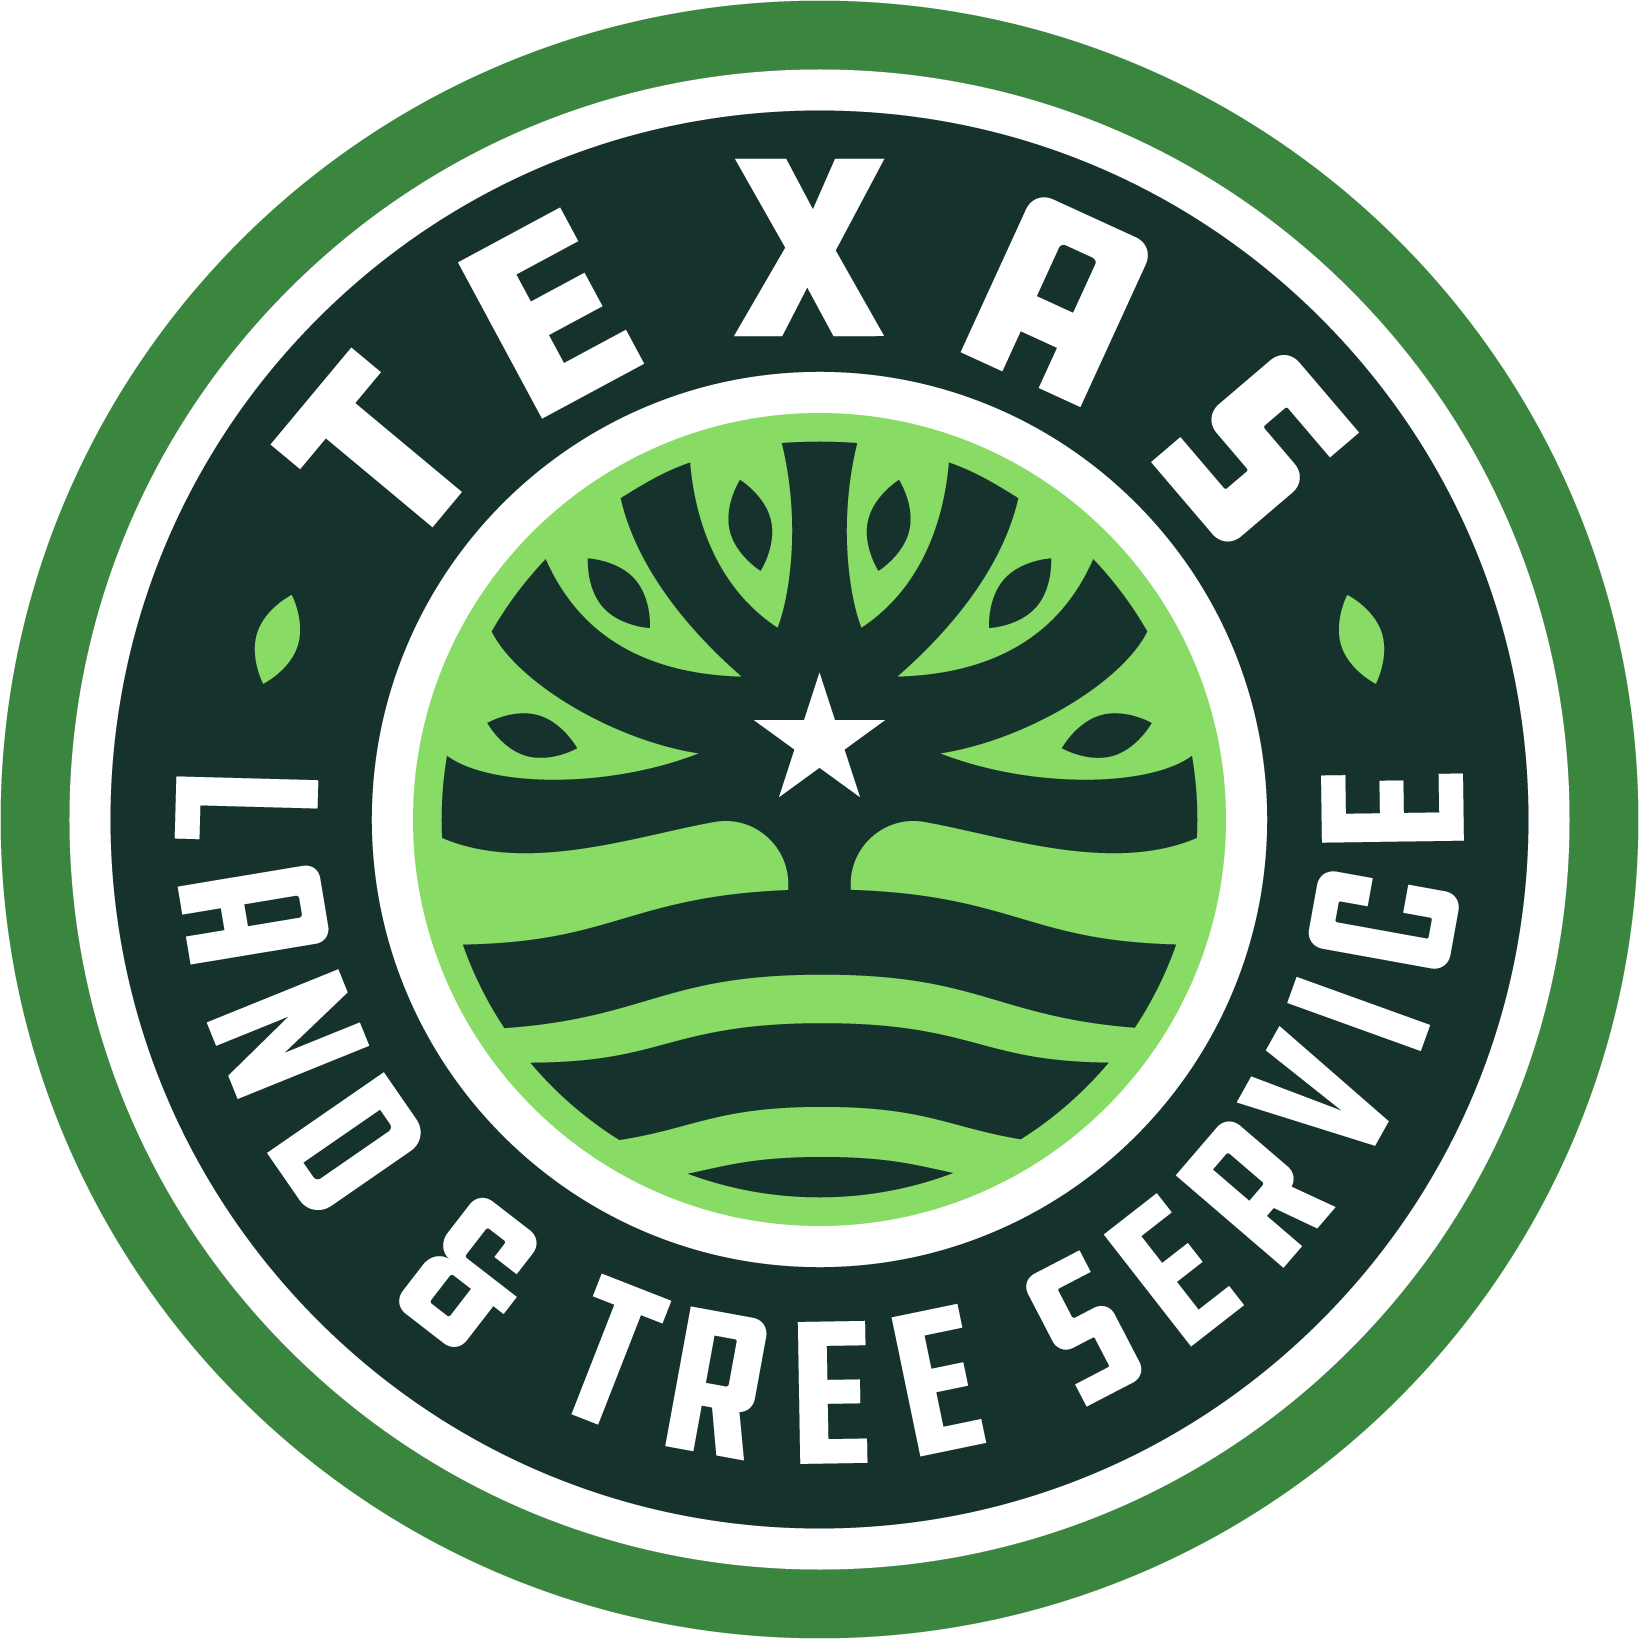 Texas Land scape logo design by logo designer David Mas for your inspiration and for the worlds largest logo competition